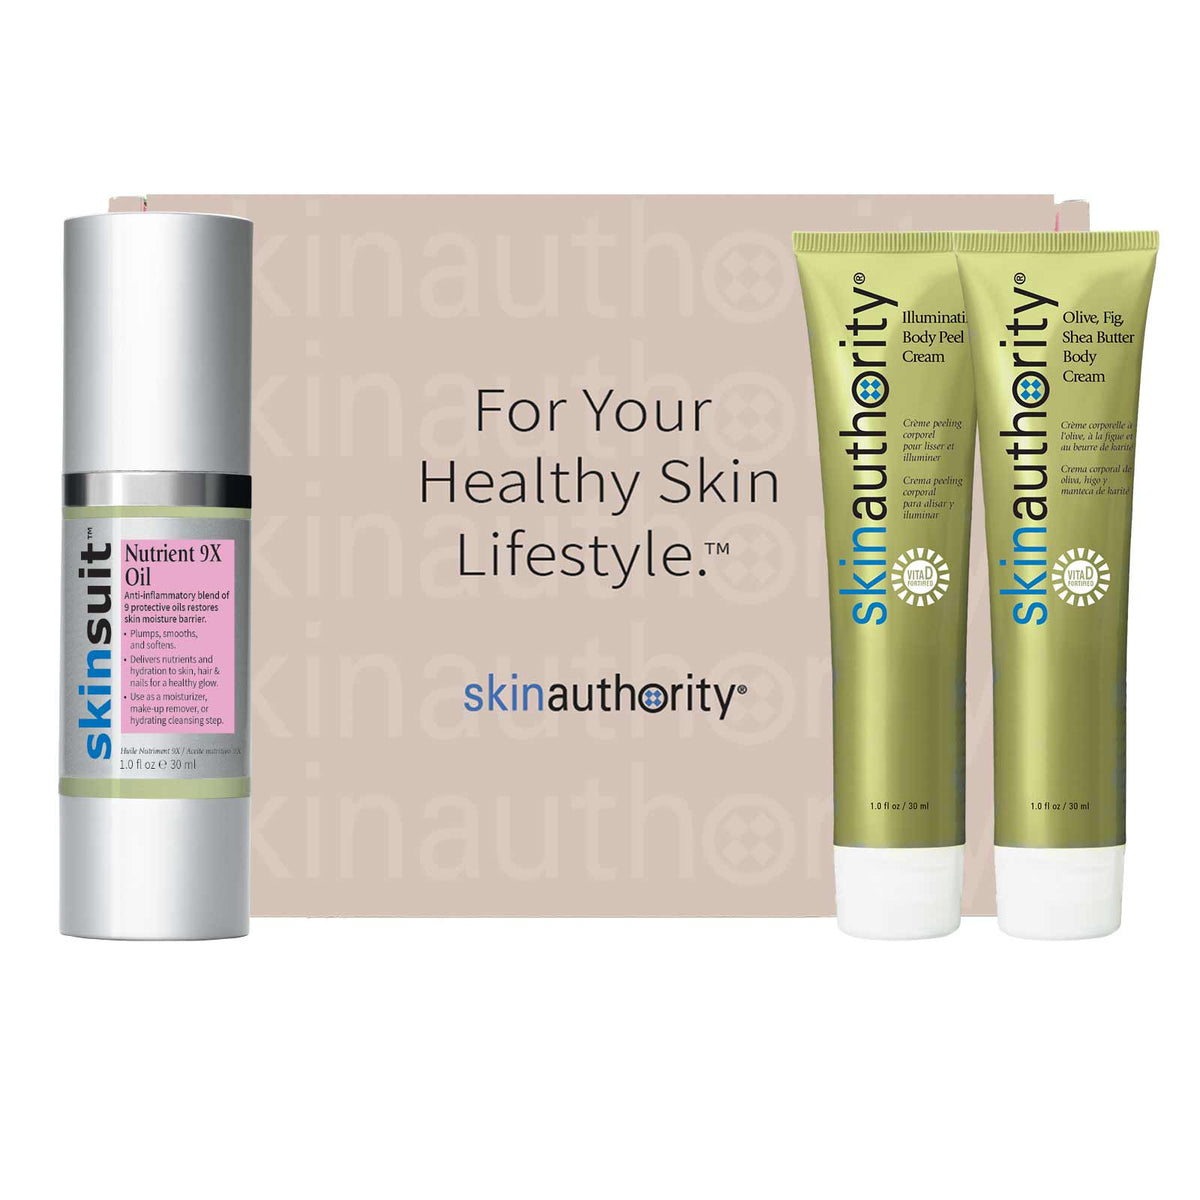 Skin Care Products for Healthy Skin